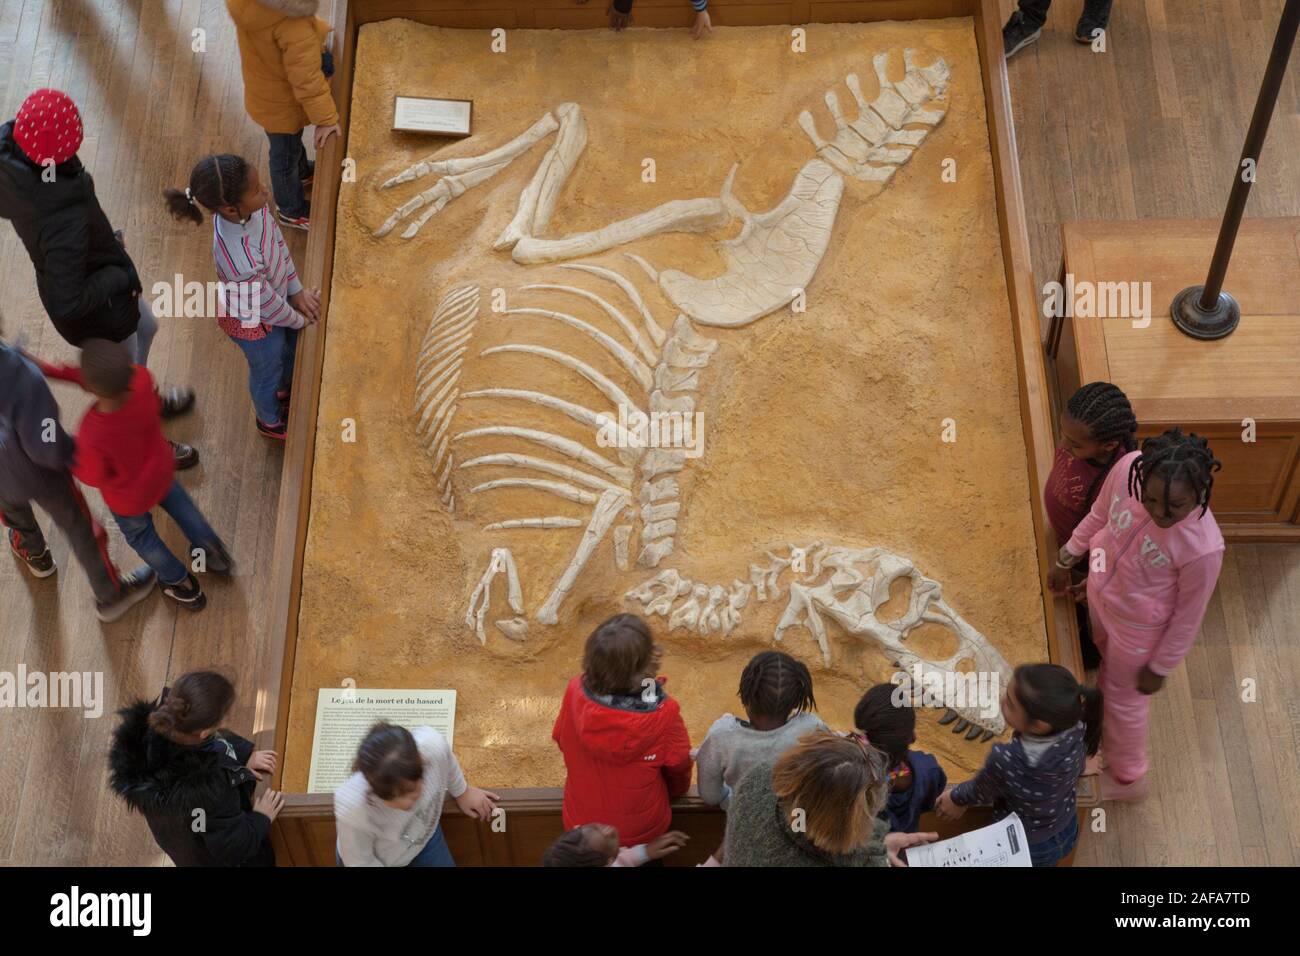 A group of school children view a dinosaur fossil at The Gallery of Paleontology and Comparative Anatomy in Paris Stock Photo